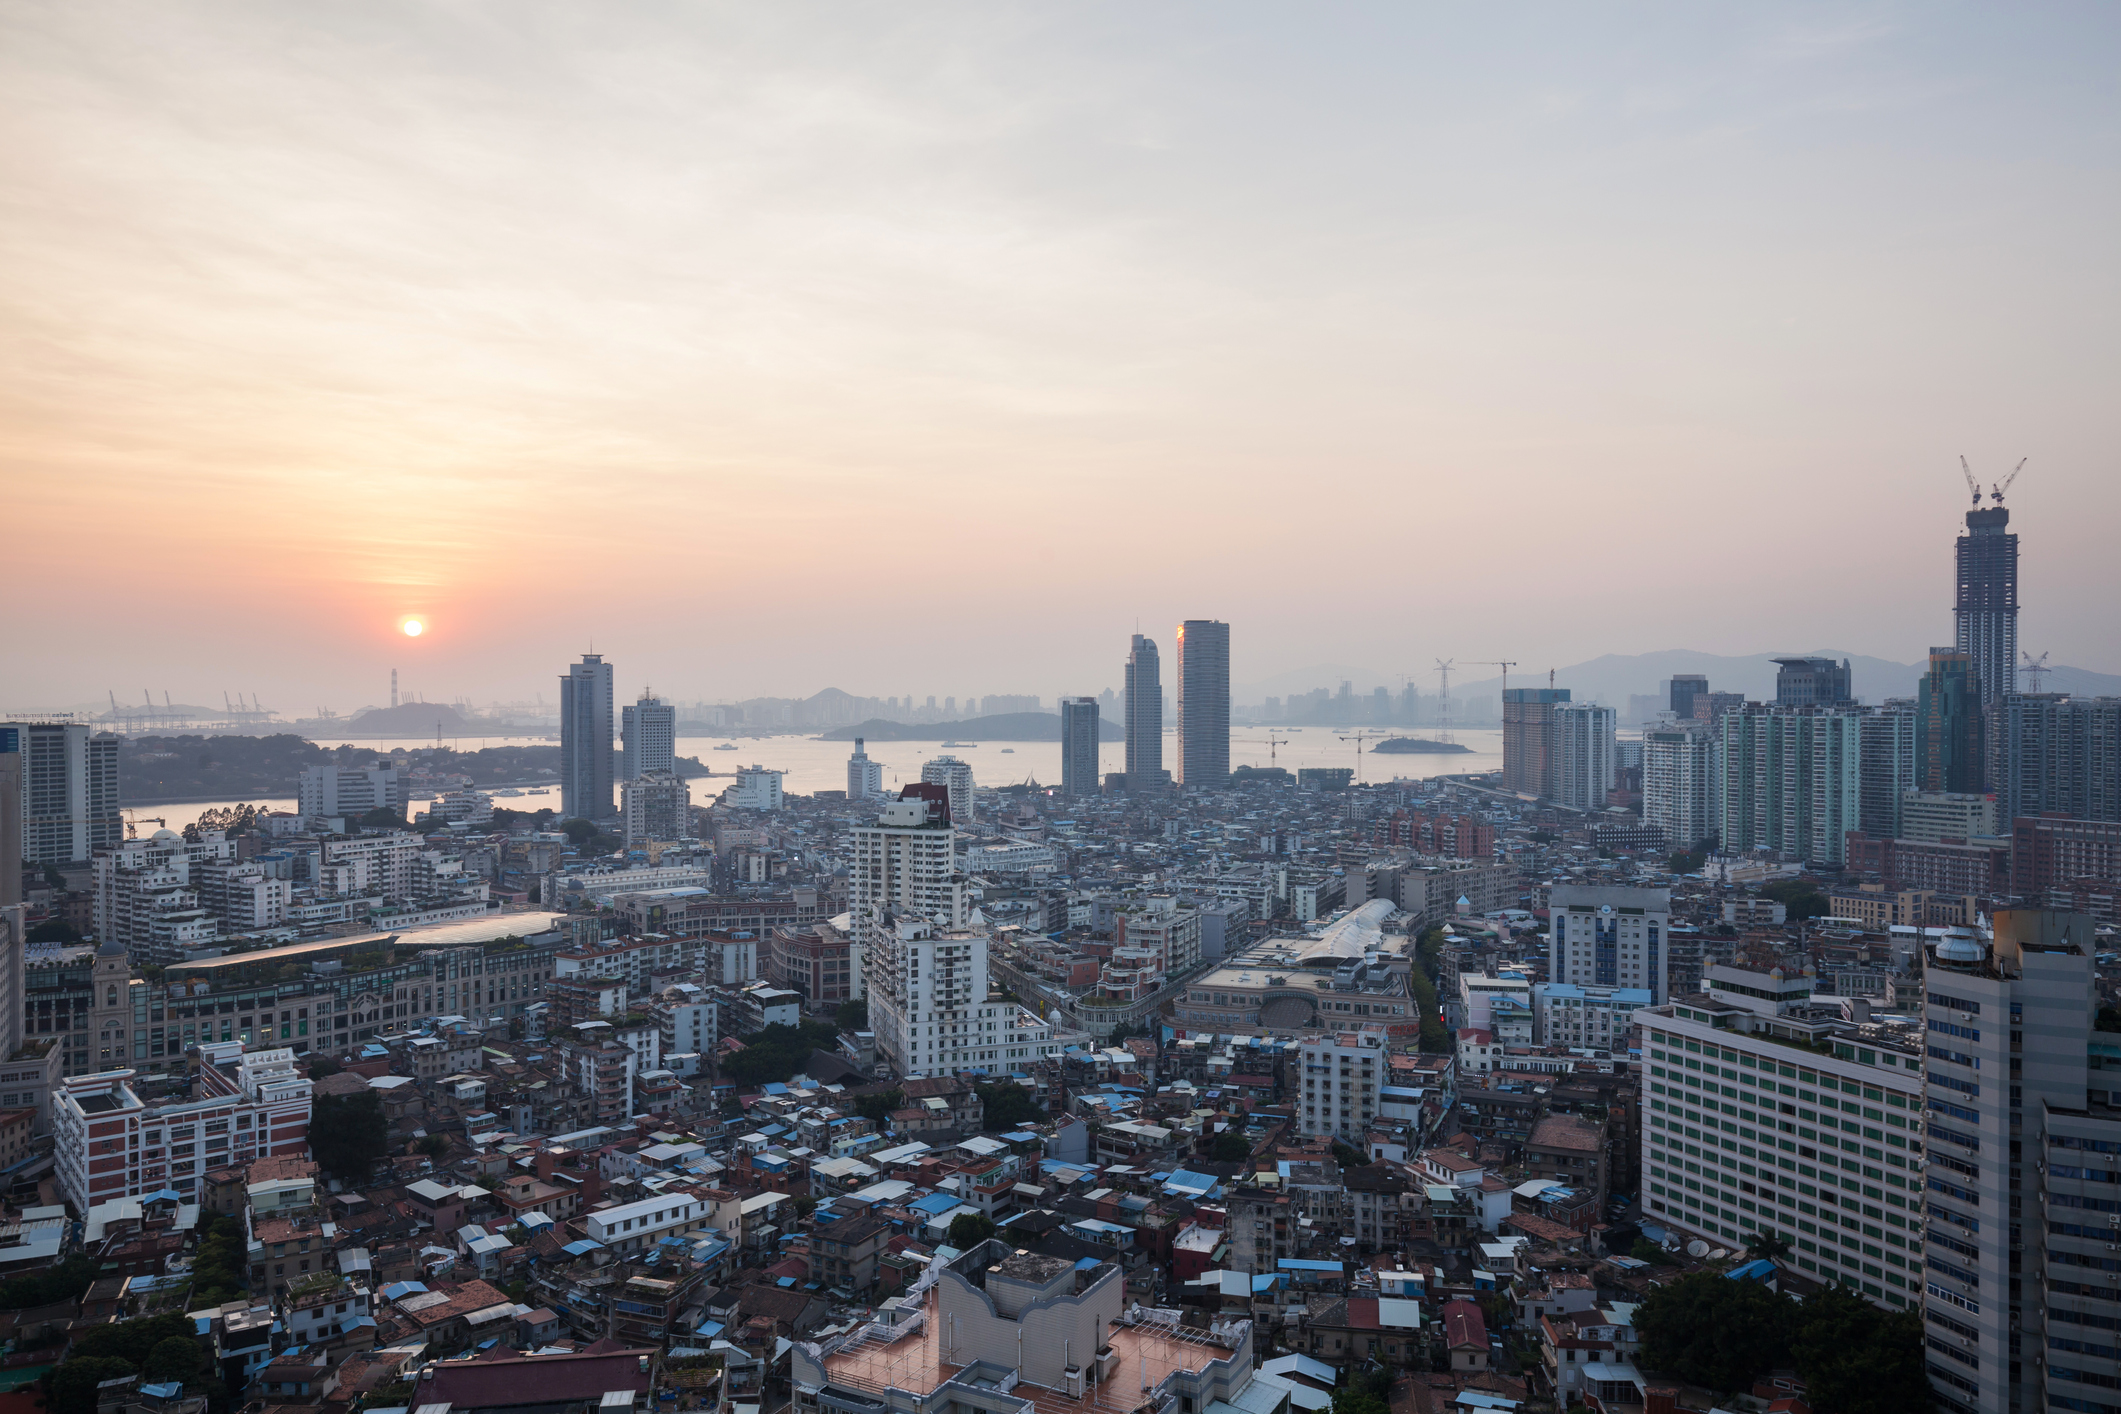 The Xiamen skyline at dusk (Getty Images)